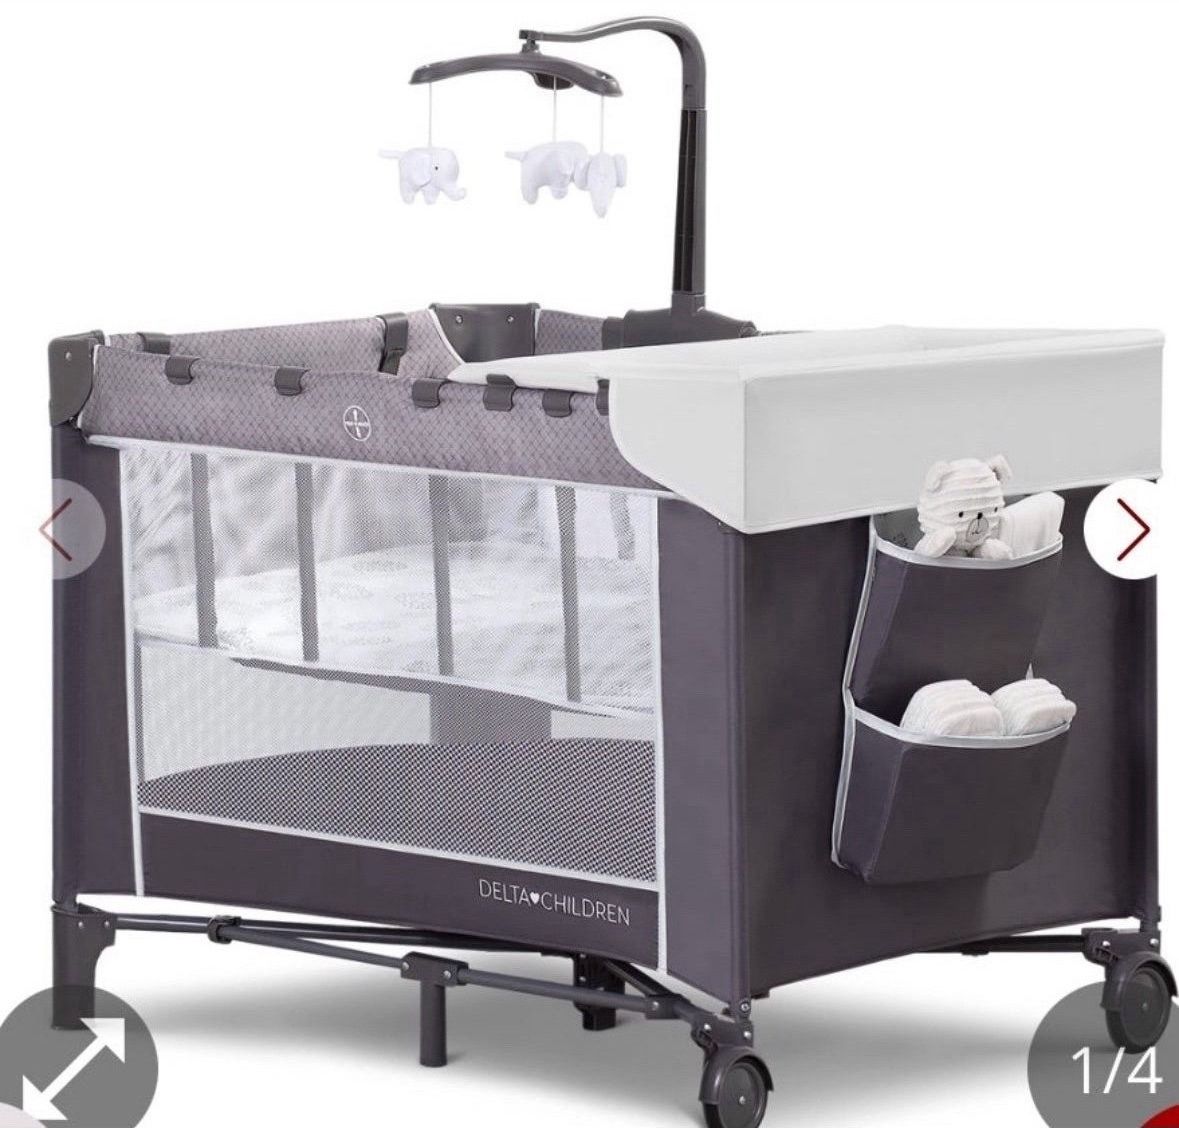 Delta Children LX Deluxe Portable Baby Play Yard With Removable Bassinet And Changing Table, Eclipsen  Open box item box is damaged   INVENTORY NUMBER